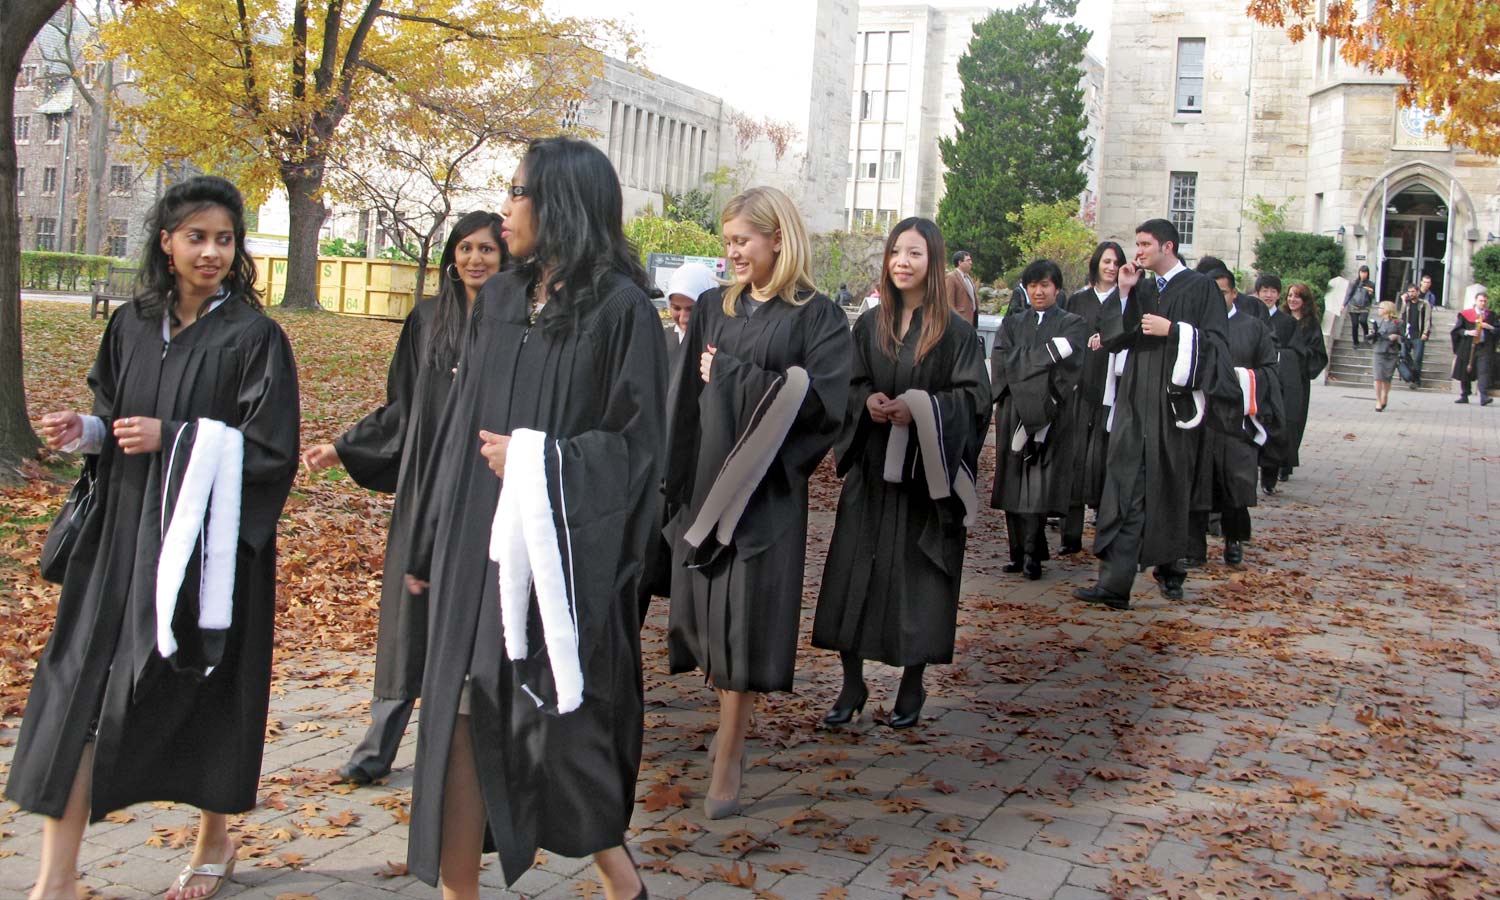 St. Michael’s maintains the largest undergraduate enrolment of any college at U of T